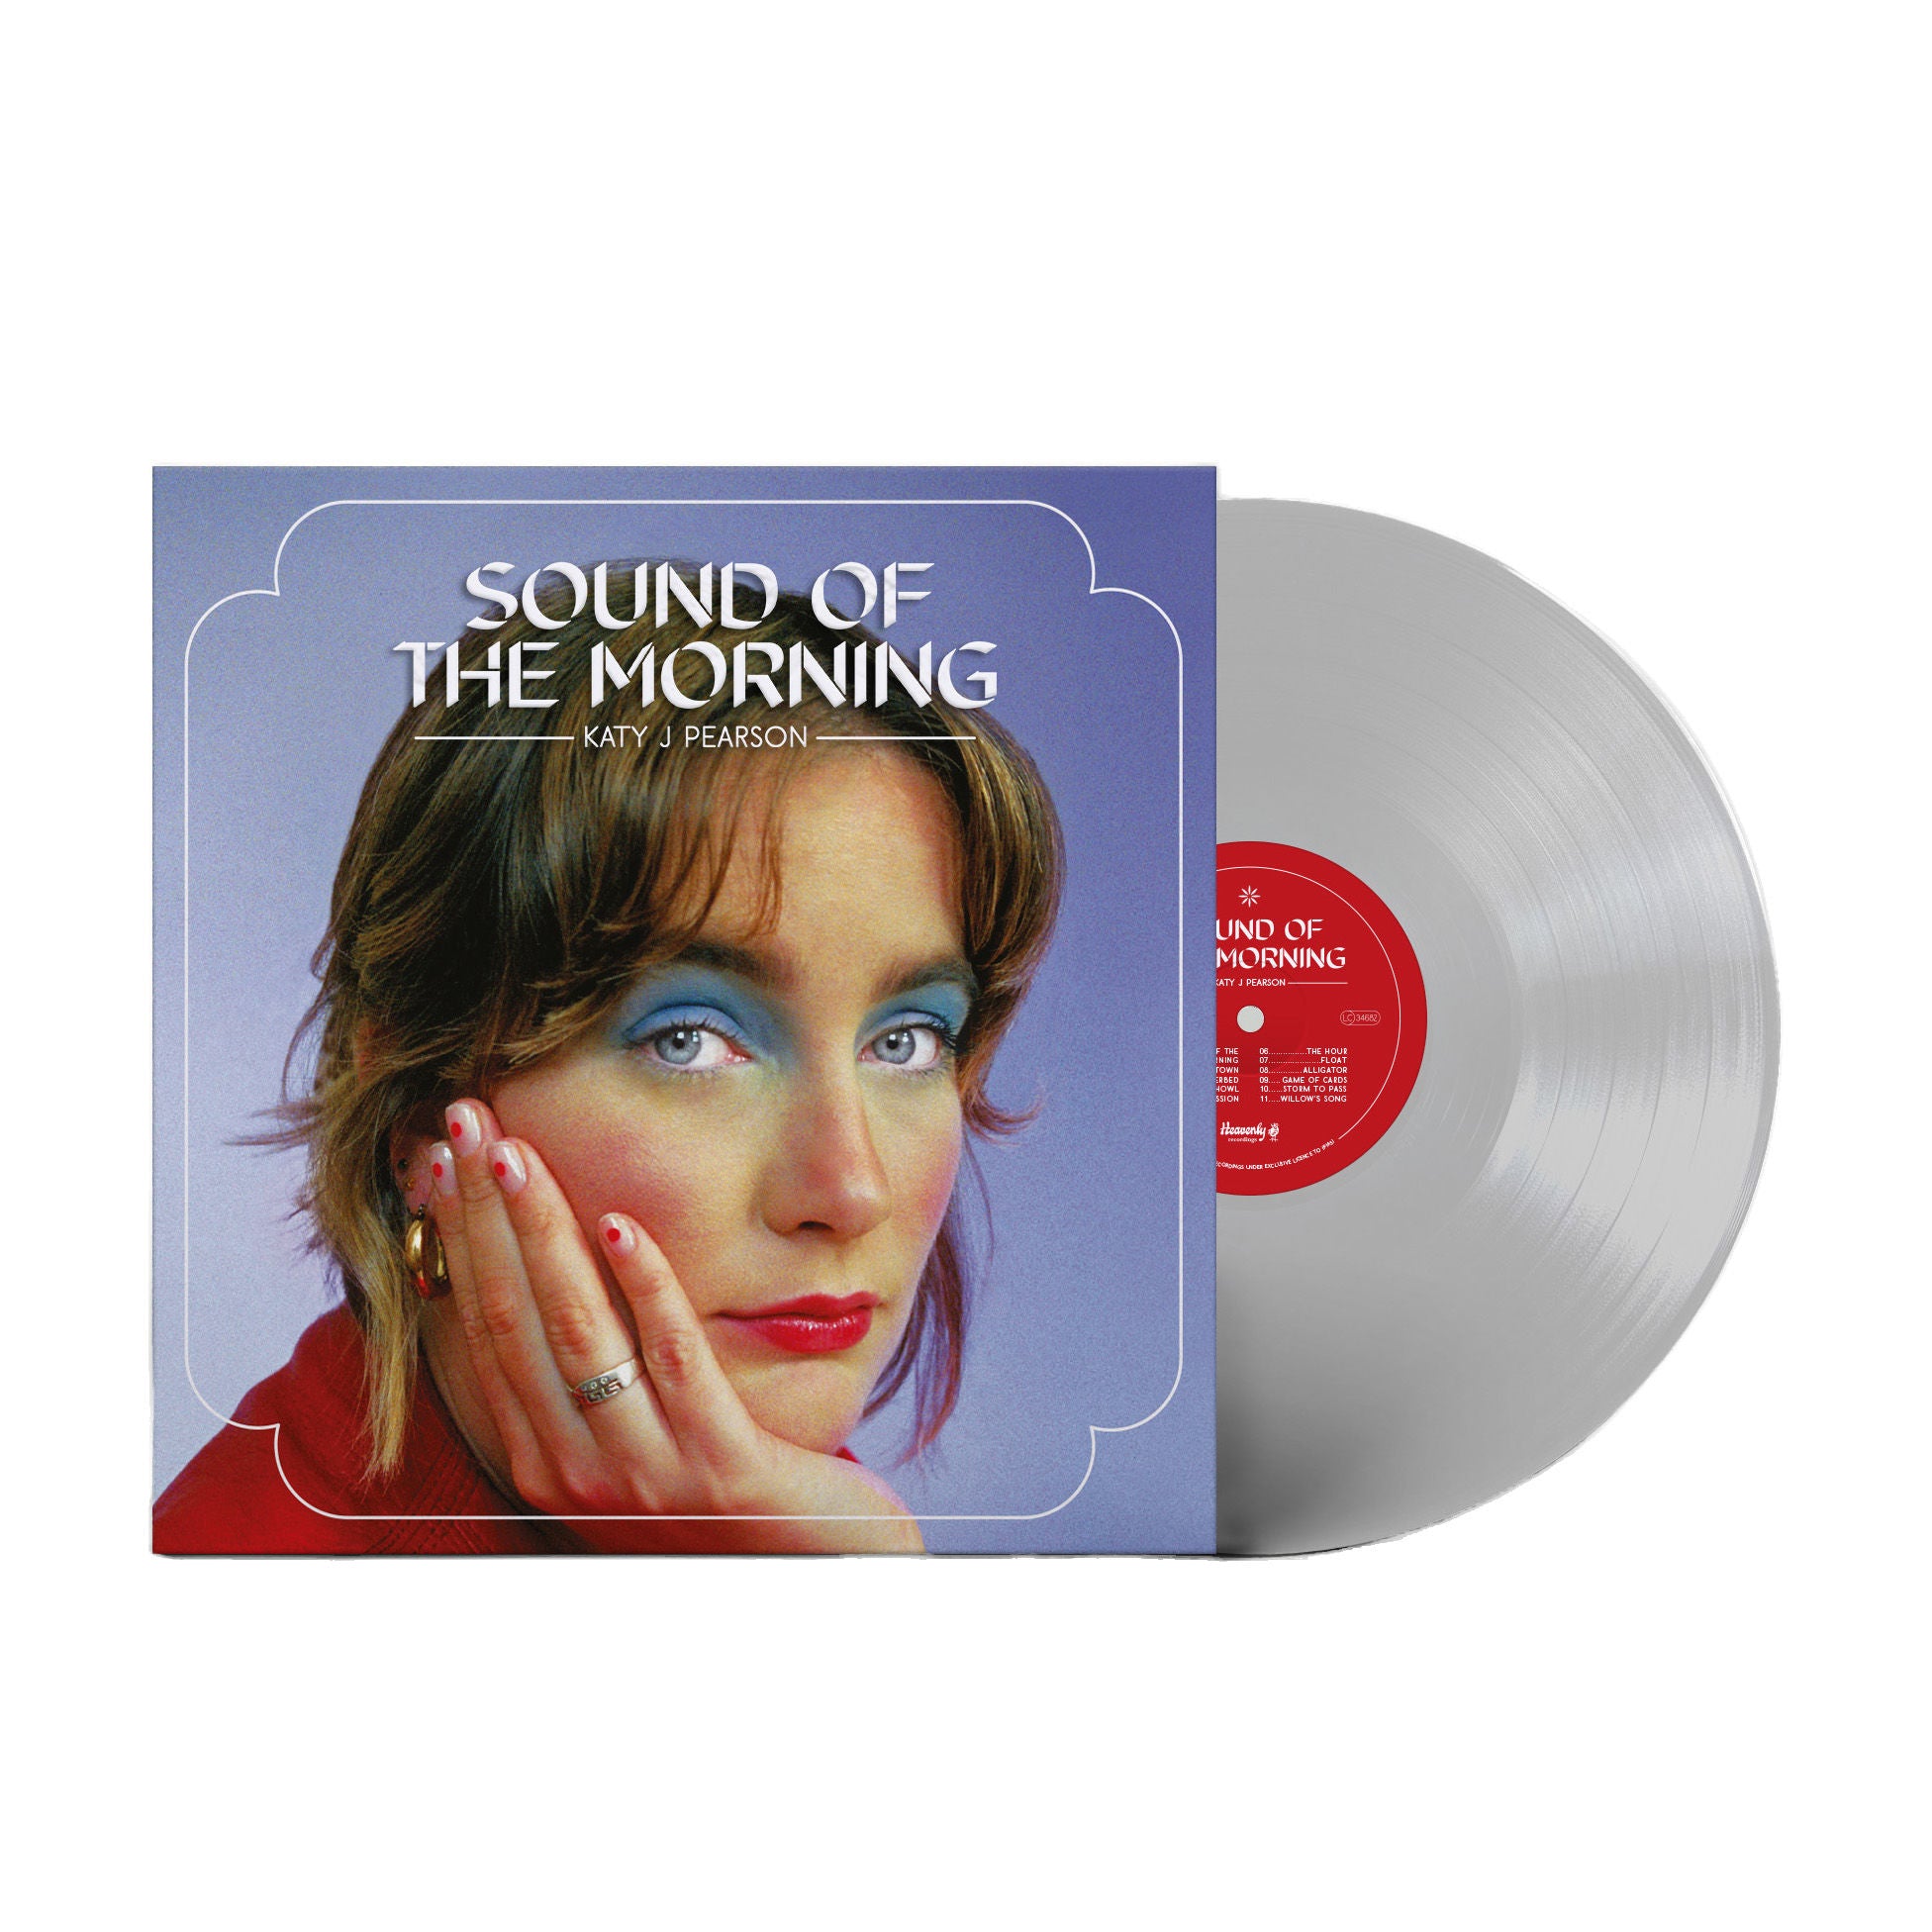 Katy J Pearson - Sound Of The Morning: Limited Clear Vinyl LP